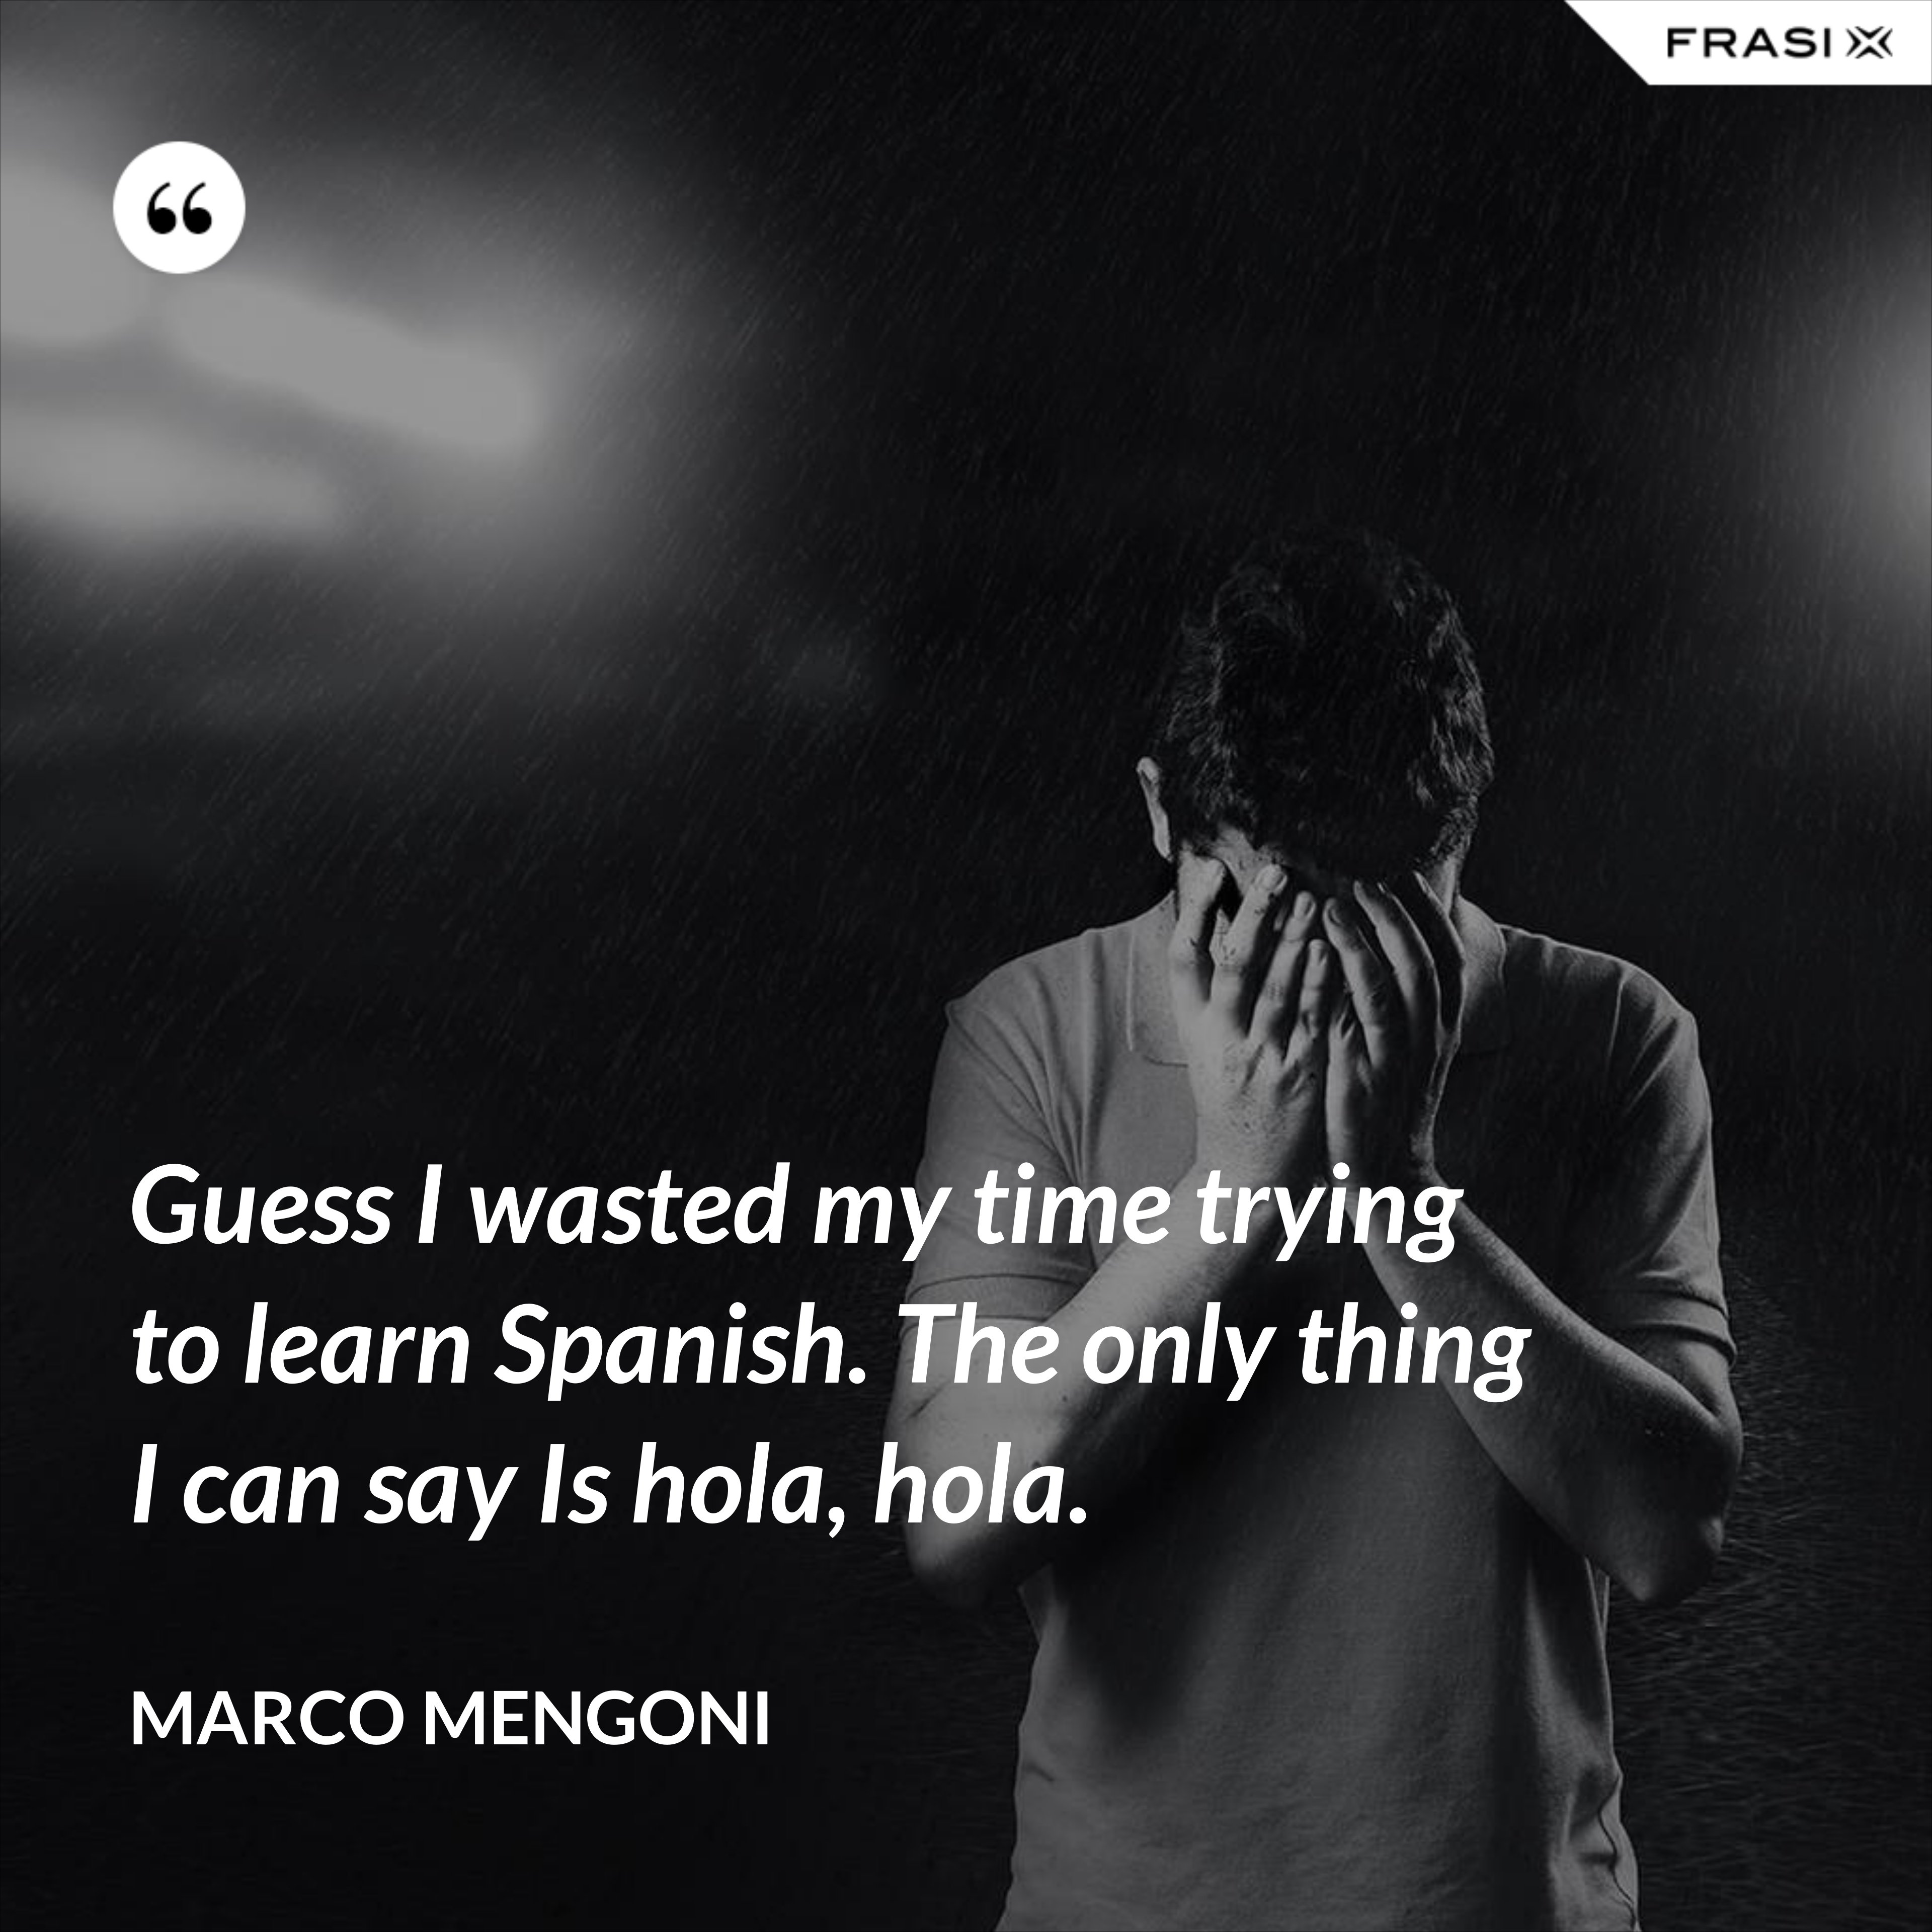 Guess I wasted my time trying to learn Spanish. The only thing I can say Is hola, hola. - Marco Mengoni